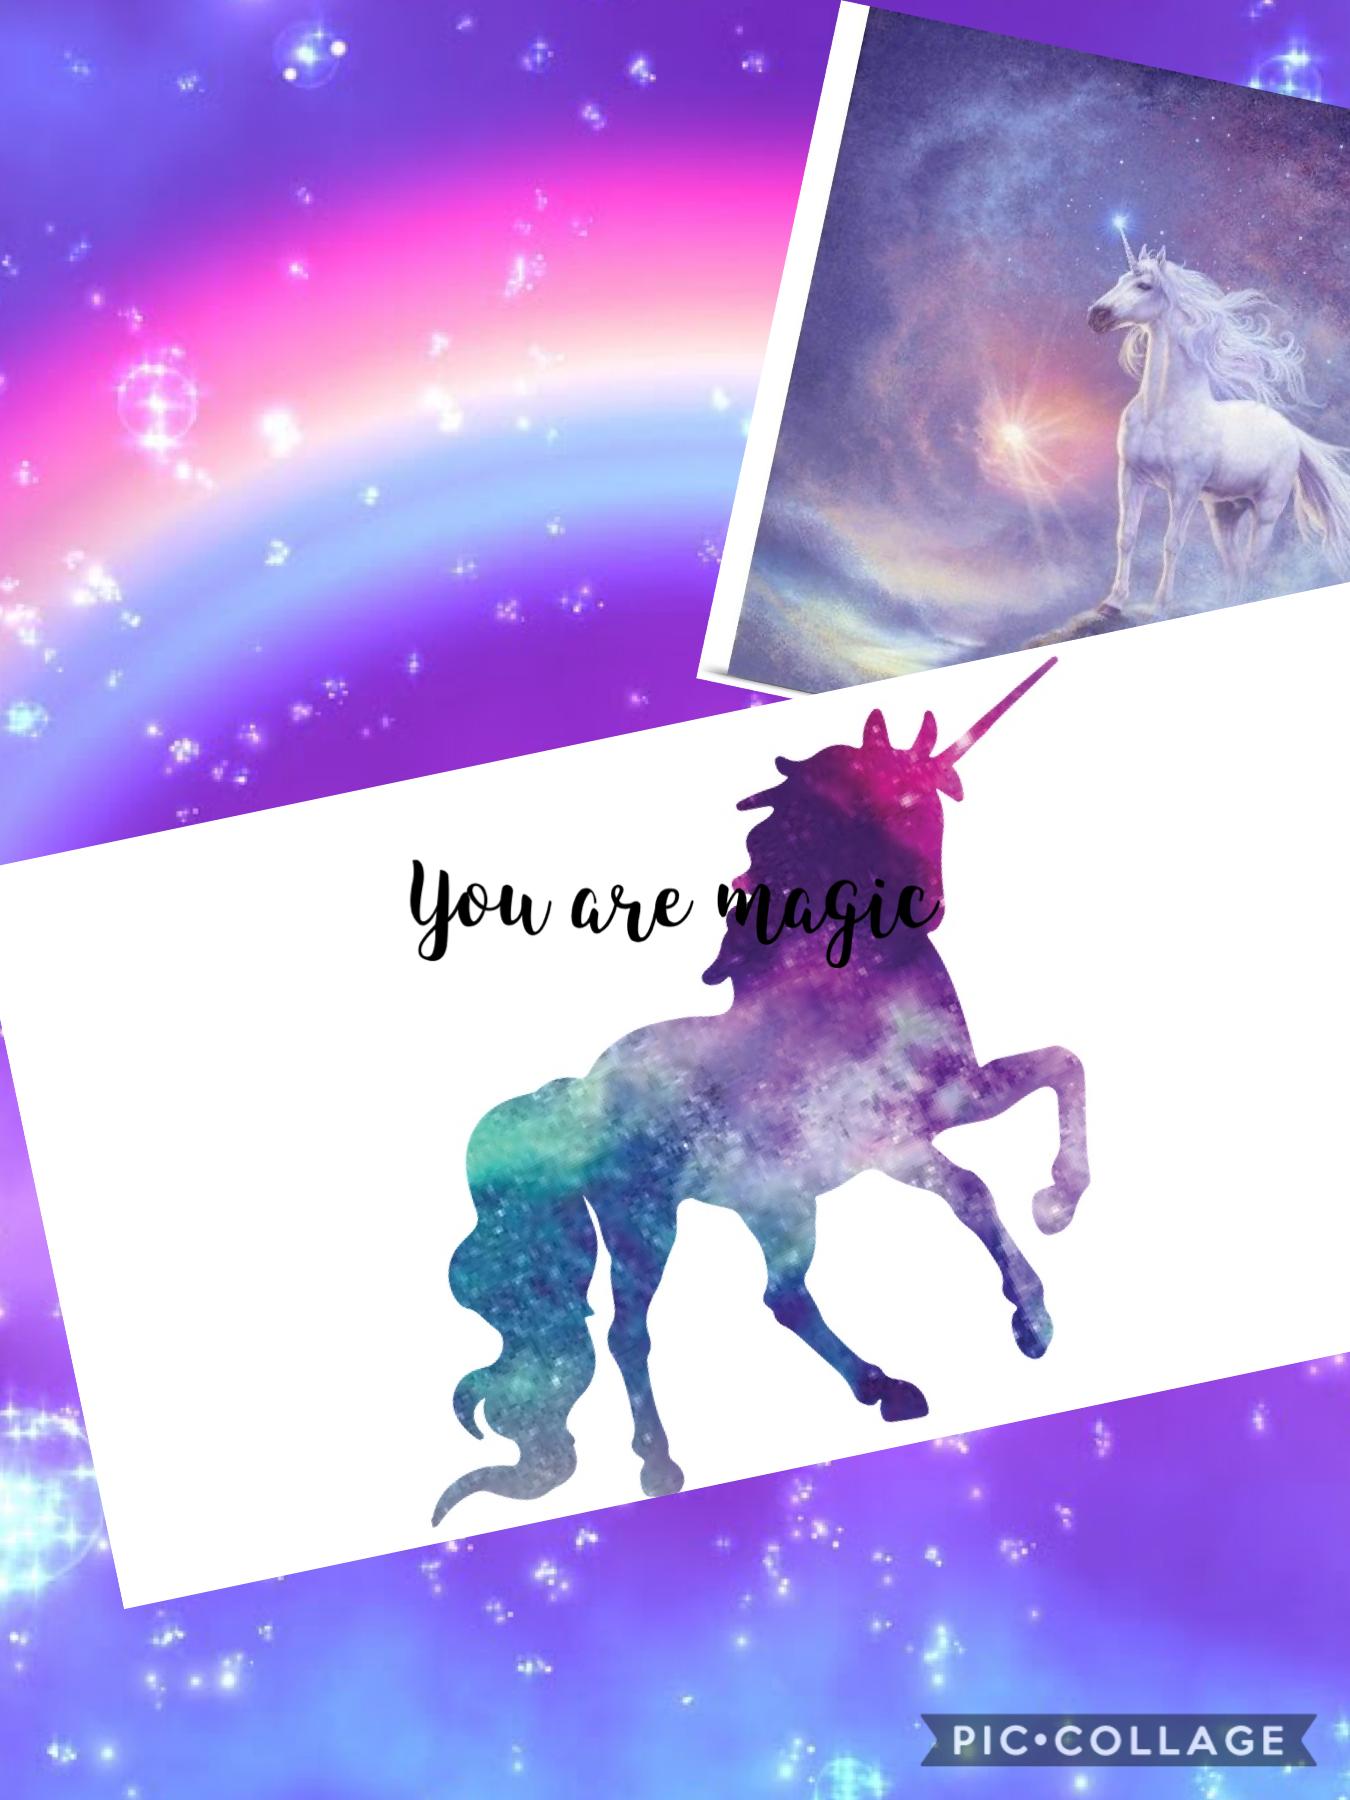 You are 🏃🏾🦄🦄🦄🦋